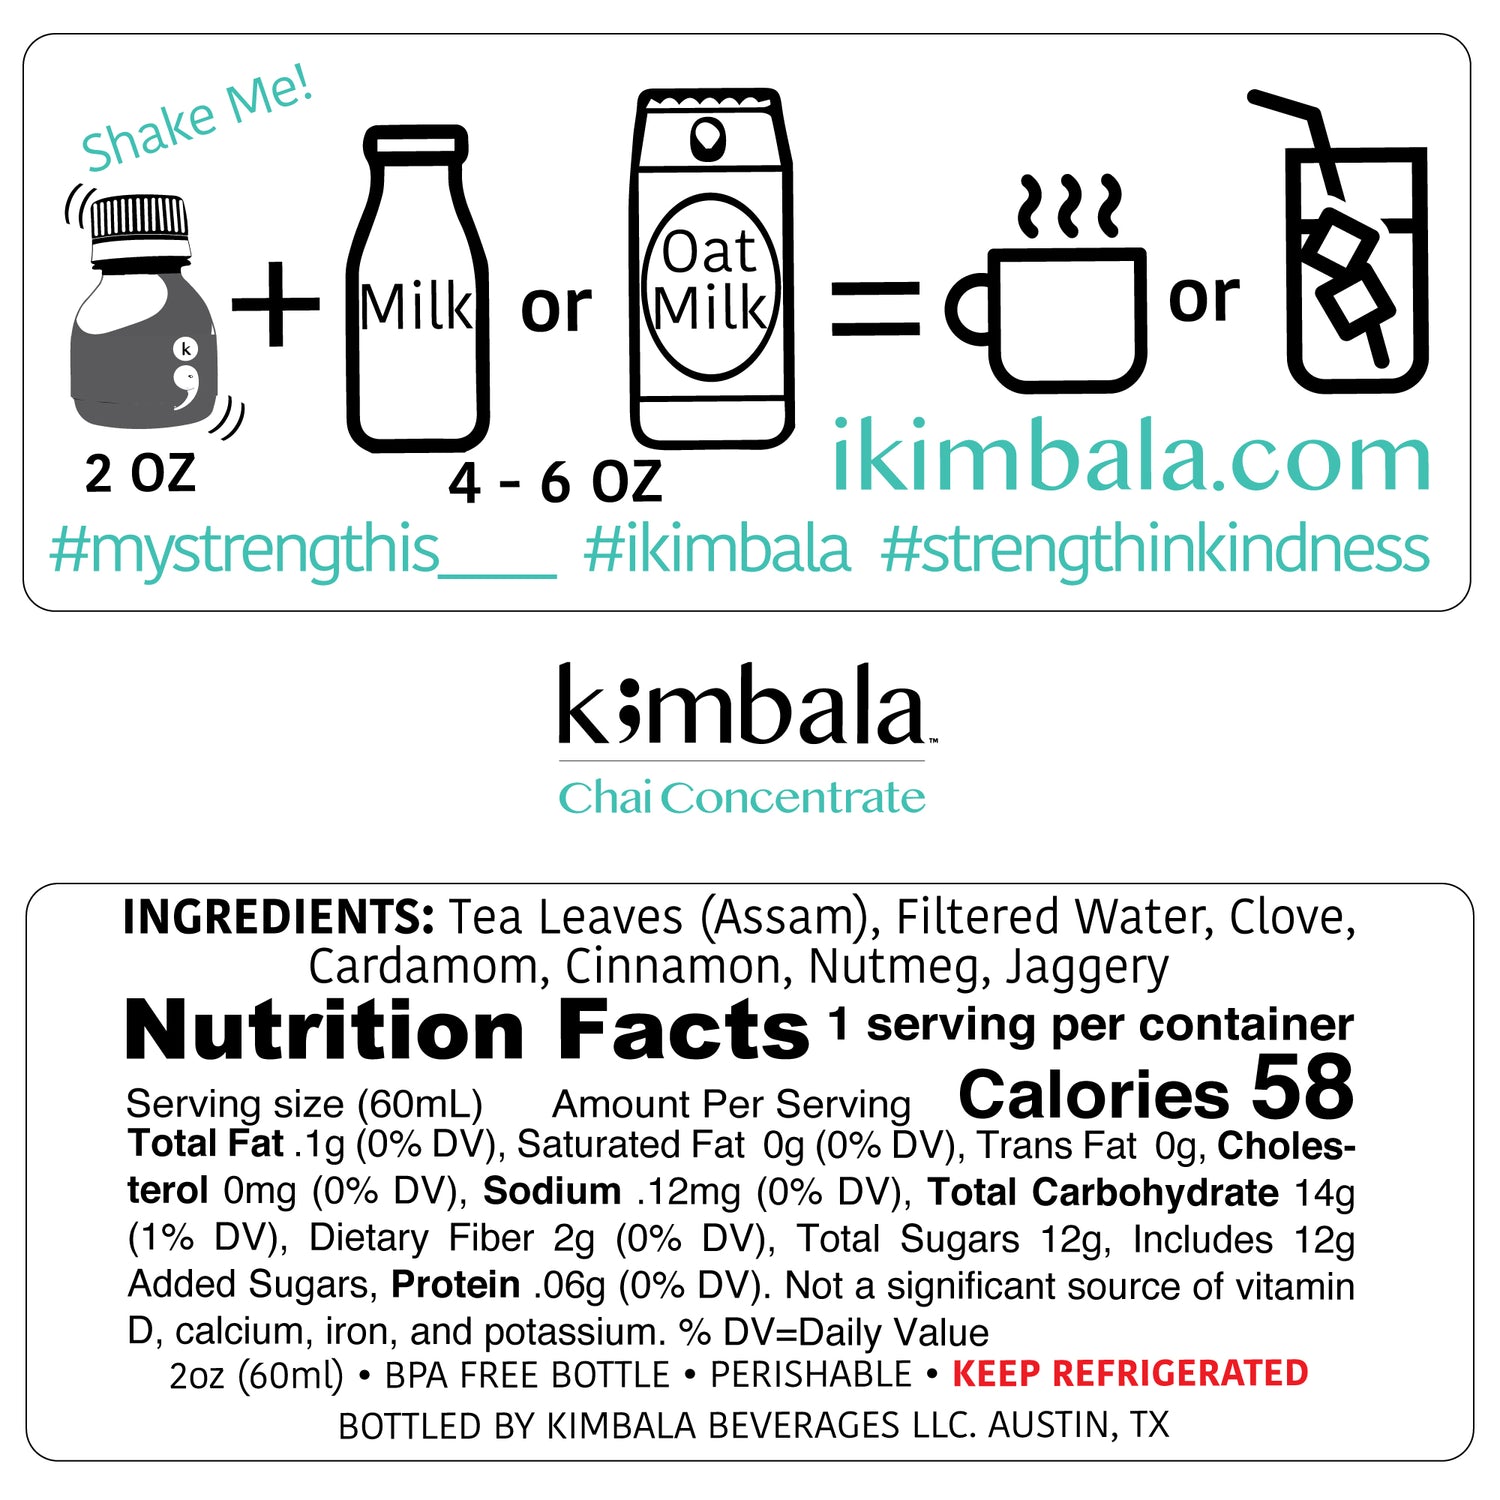 Kimbala Chai Concentrate nutrition facts for 2oz bottle and explanation in graphics on how to use the concentrate. Mix one 2oz bottle with 4-6oz of milk or oat milk and enjoy it hot or cold.